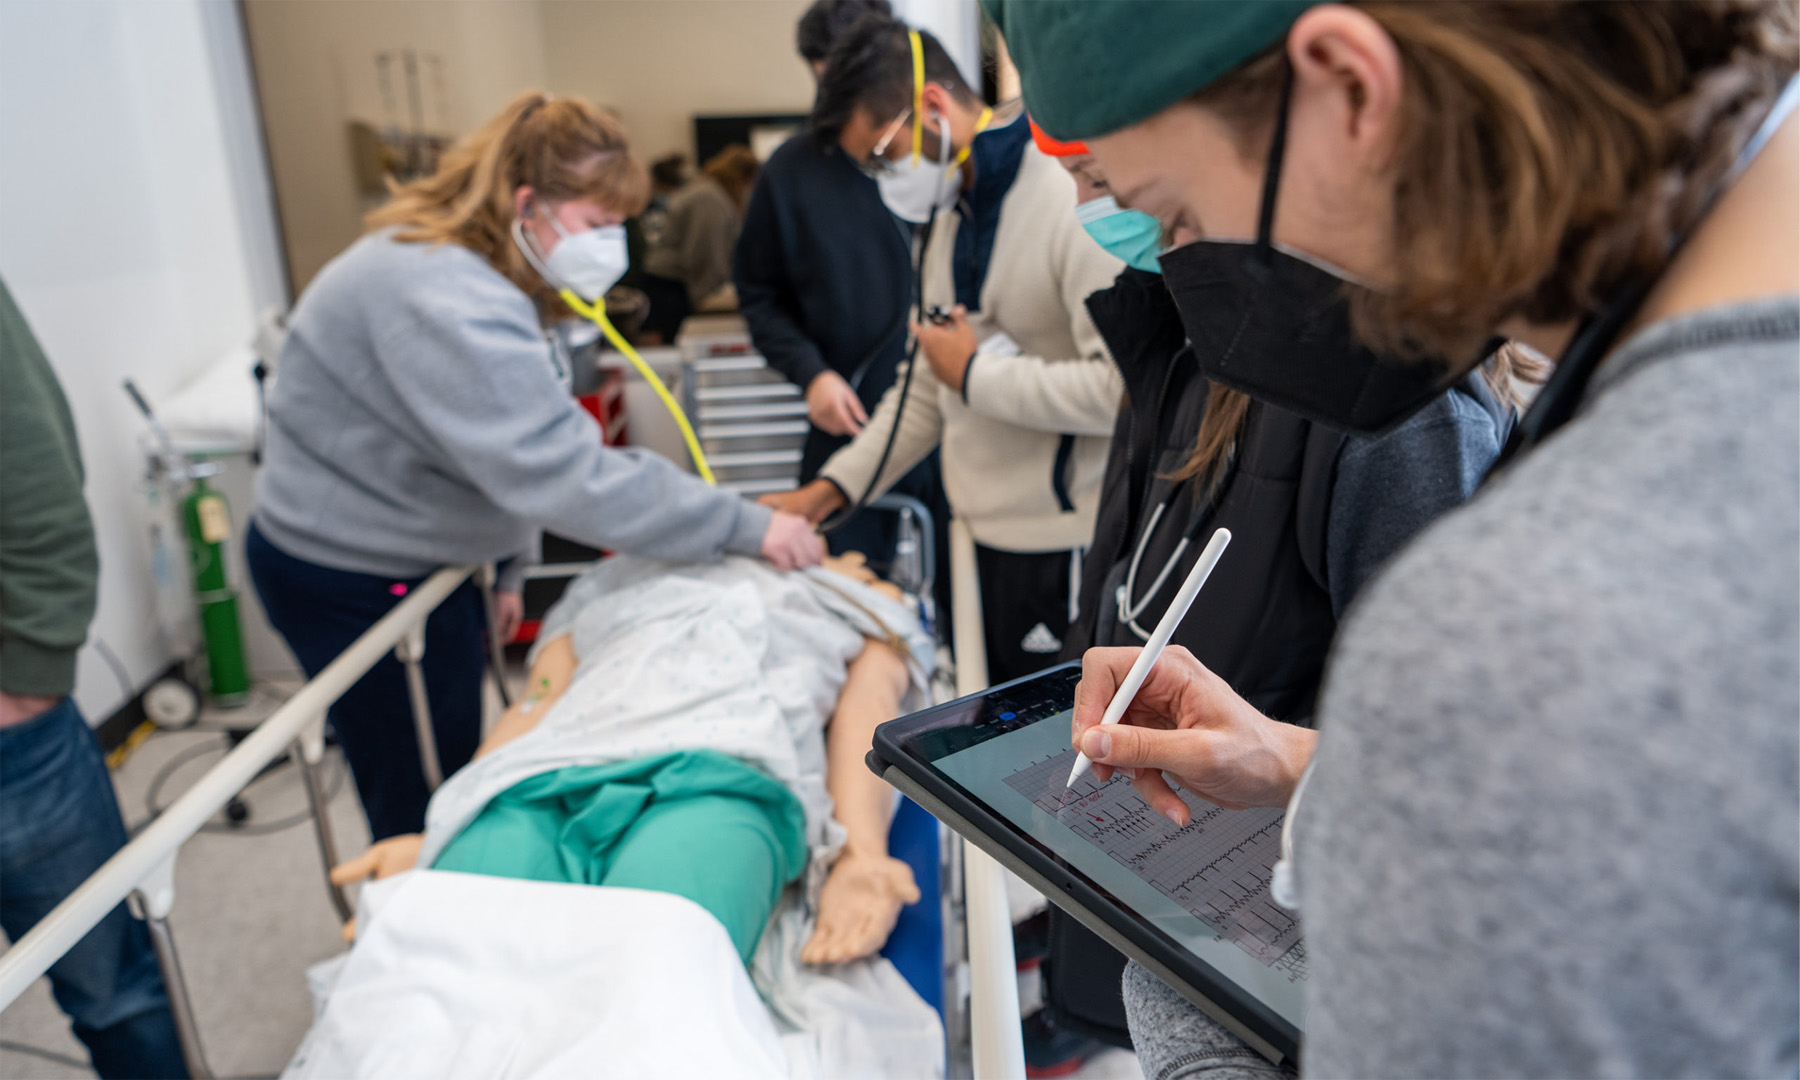 Ohio University Heritage College of Osteopathic Medicine students practice clinical skills in one of the labs inside Heritage Hall. Photo by Ben Wirtz Siegel, BSVC ’02